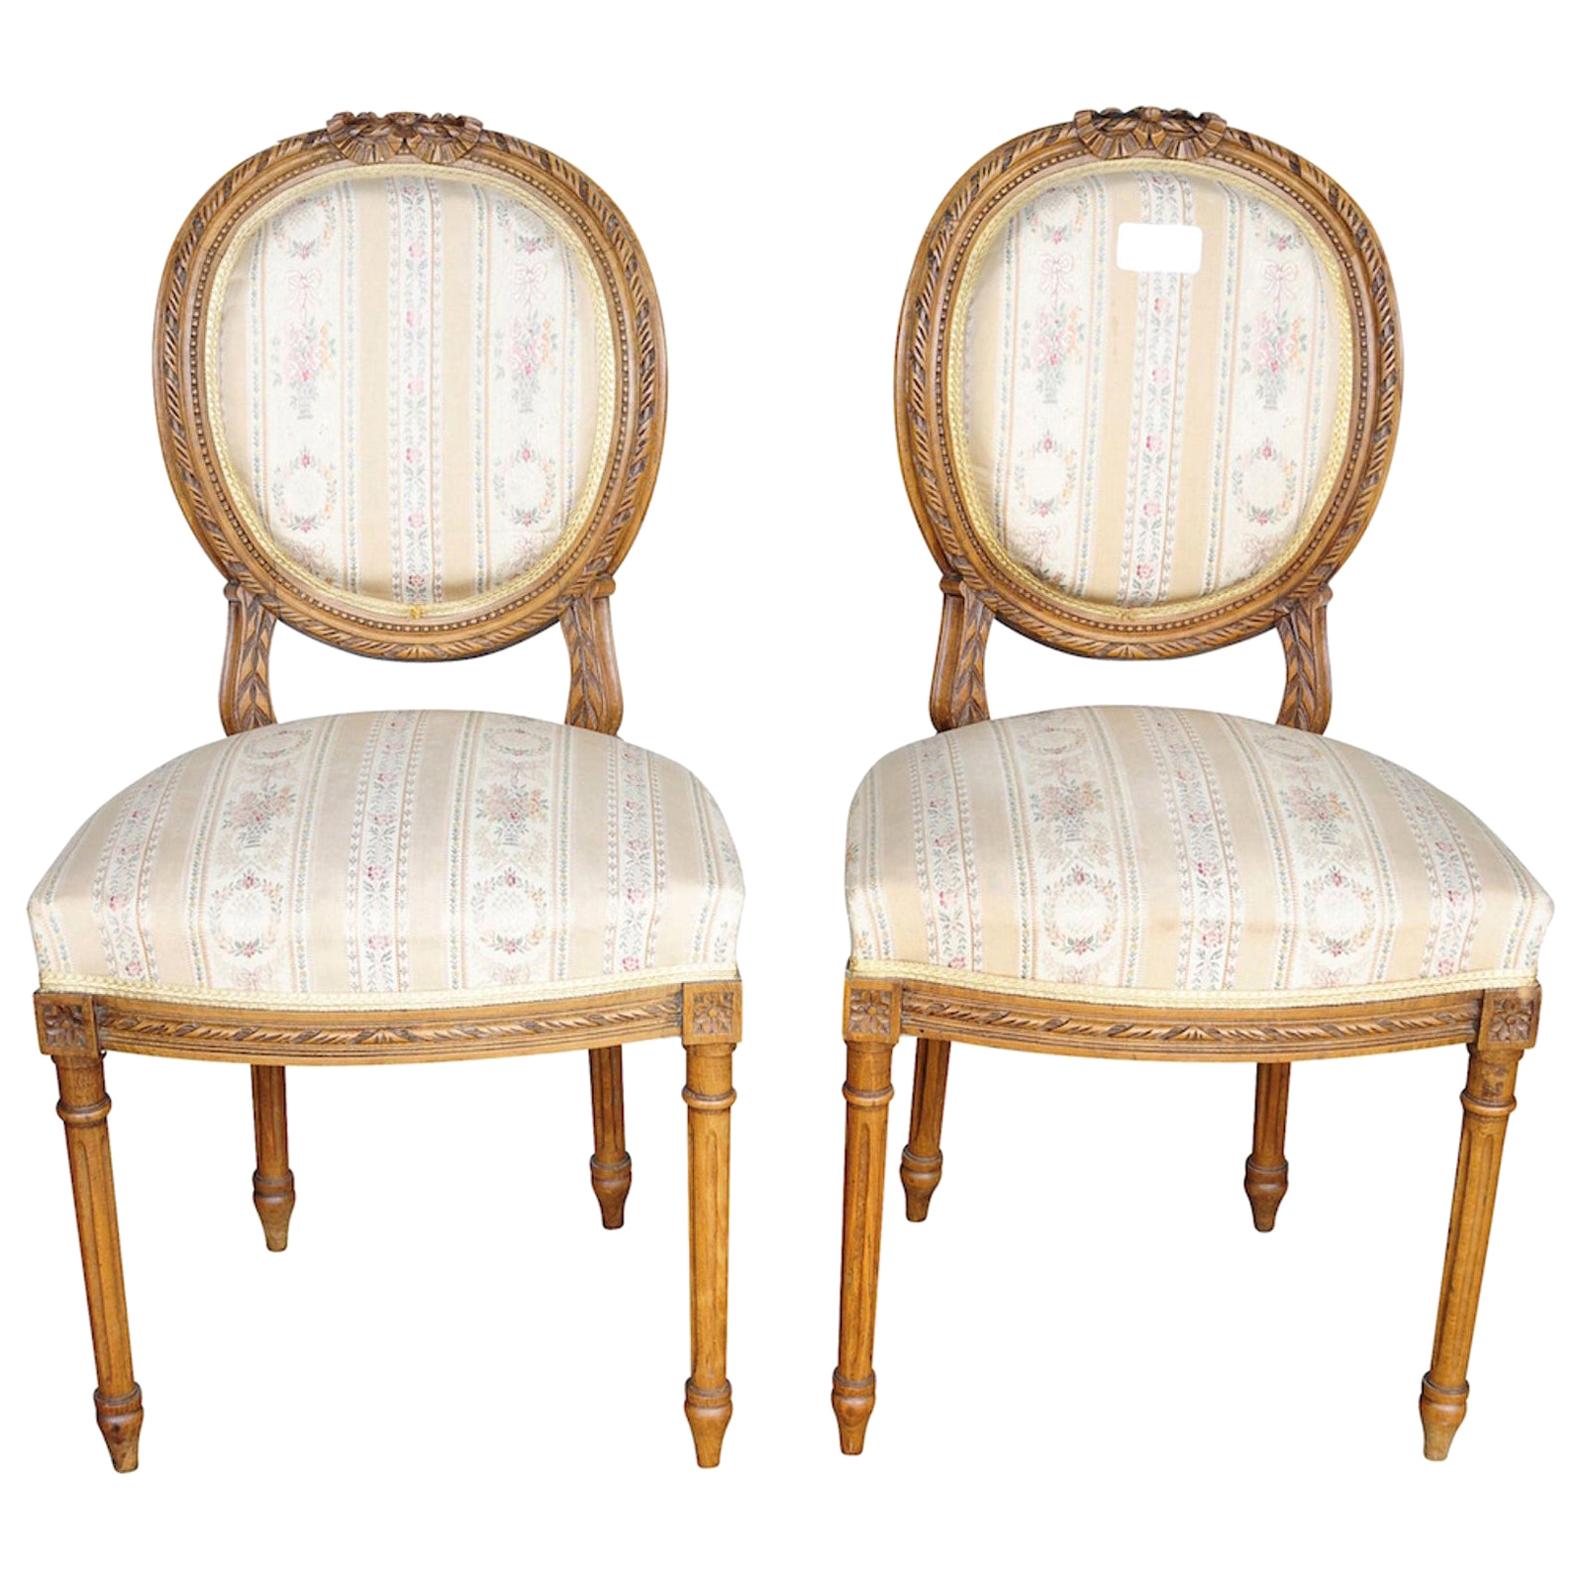 Pair of Gustavian Carved Canework Dining Chairs Natural Finish, Early 1900s